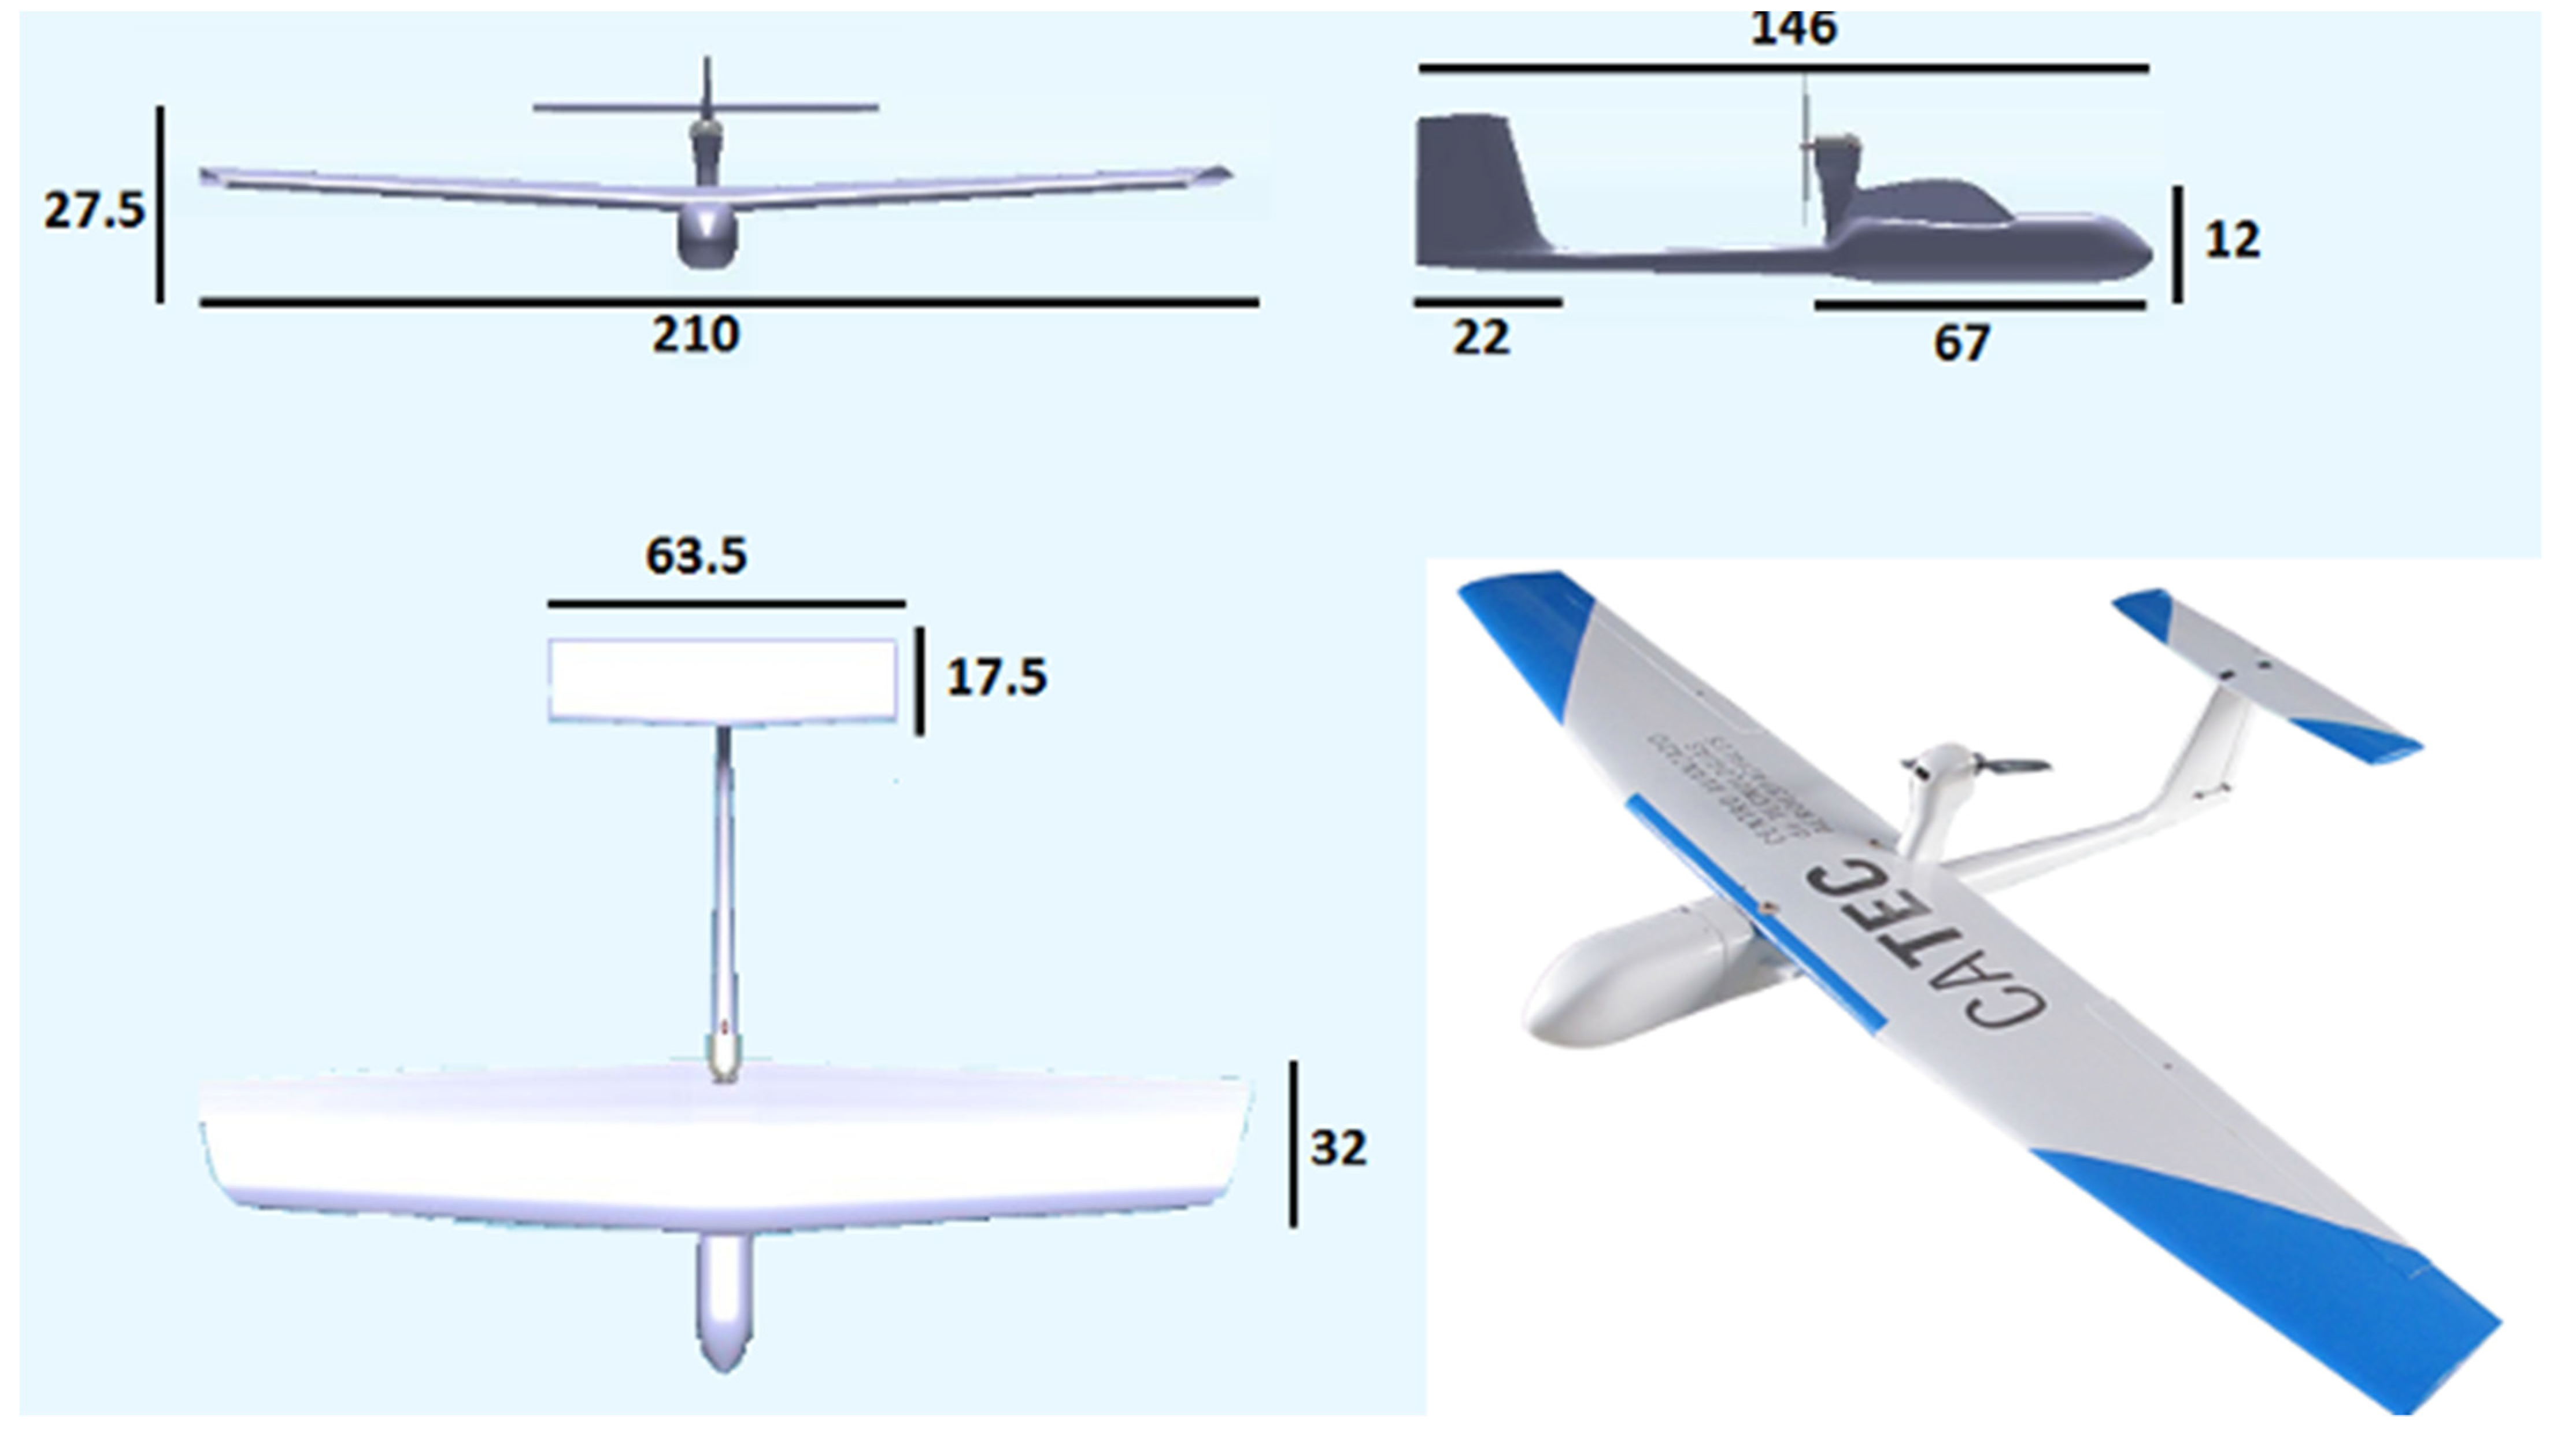 Drones | Free | Development of a Fixed-Wing Drone System for Aerial Insect Sampling